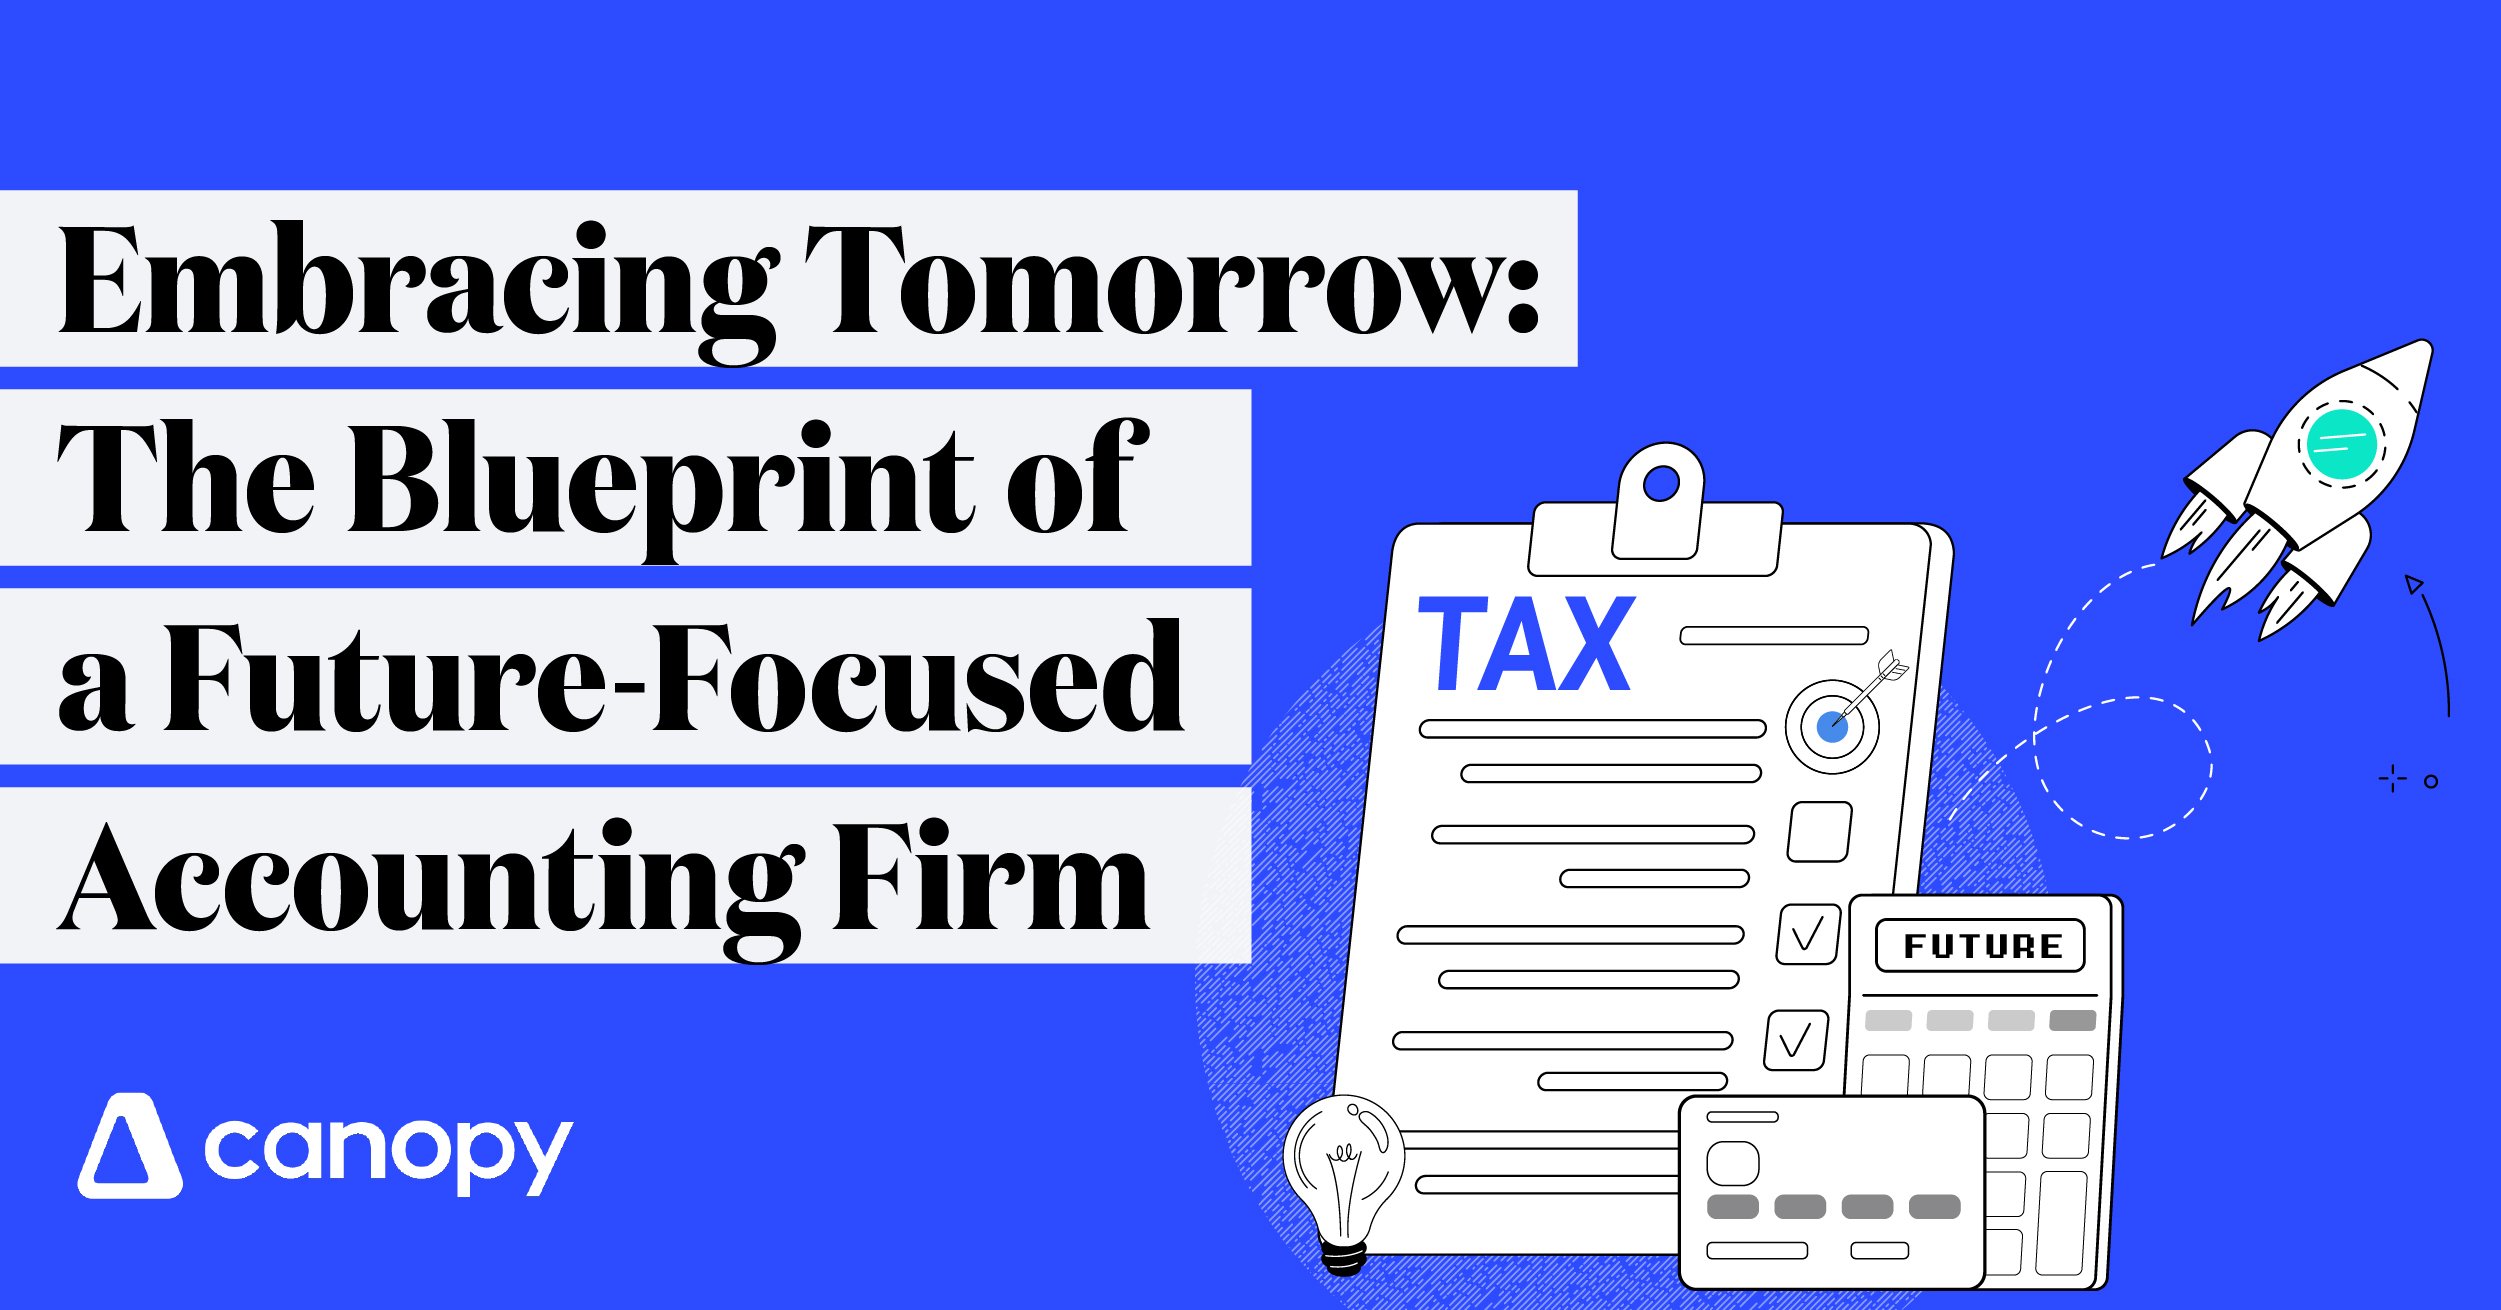 Embracing Tomorrow: The Blueprint of a Future-focused Accounting Firm